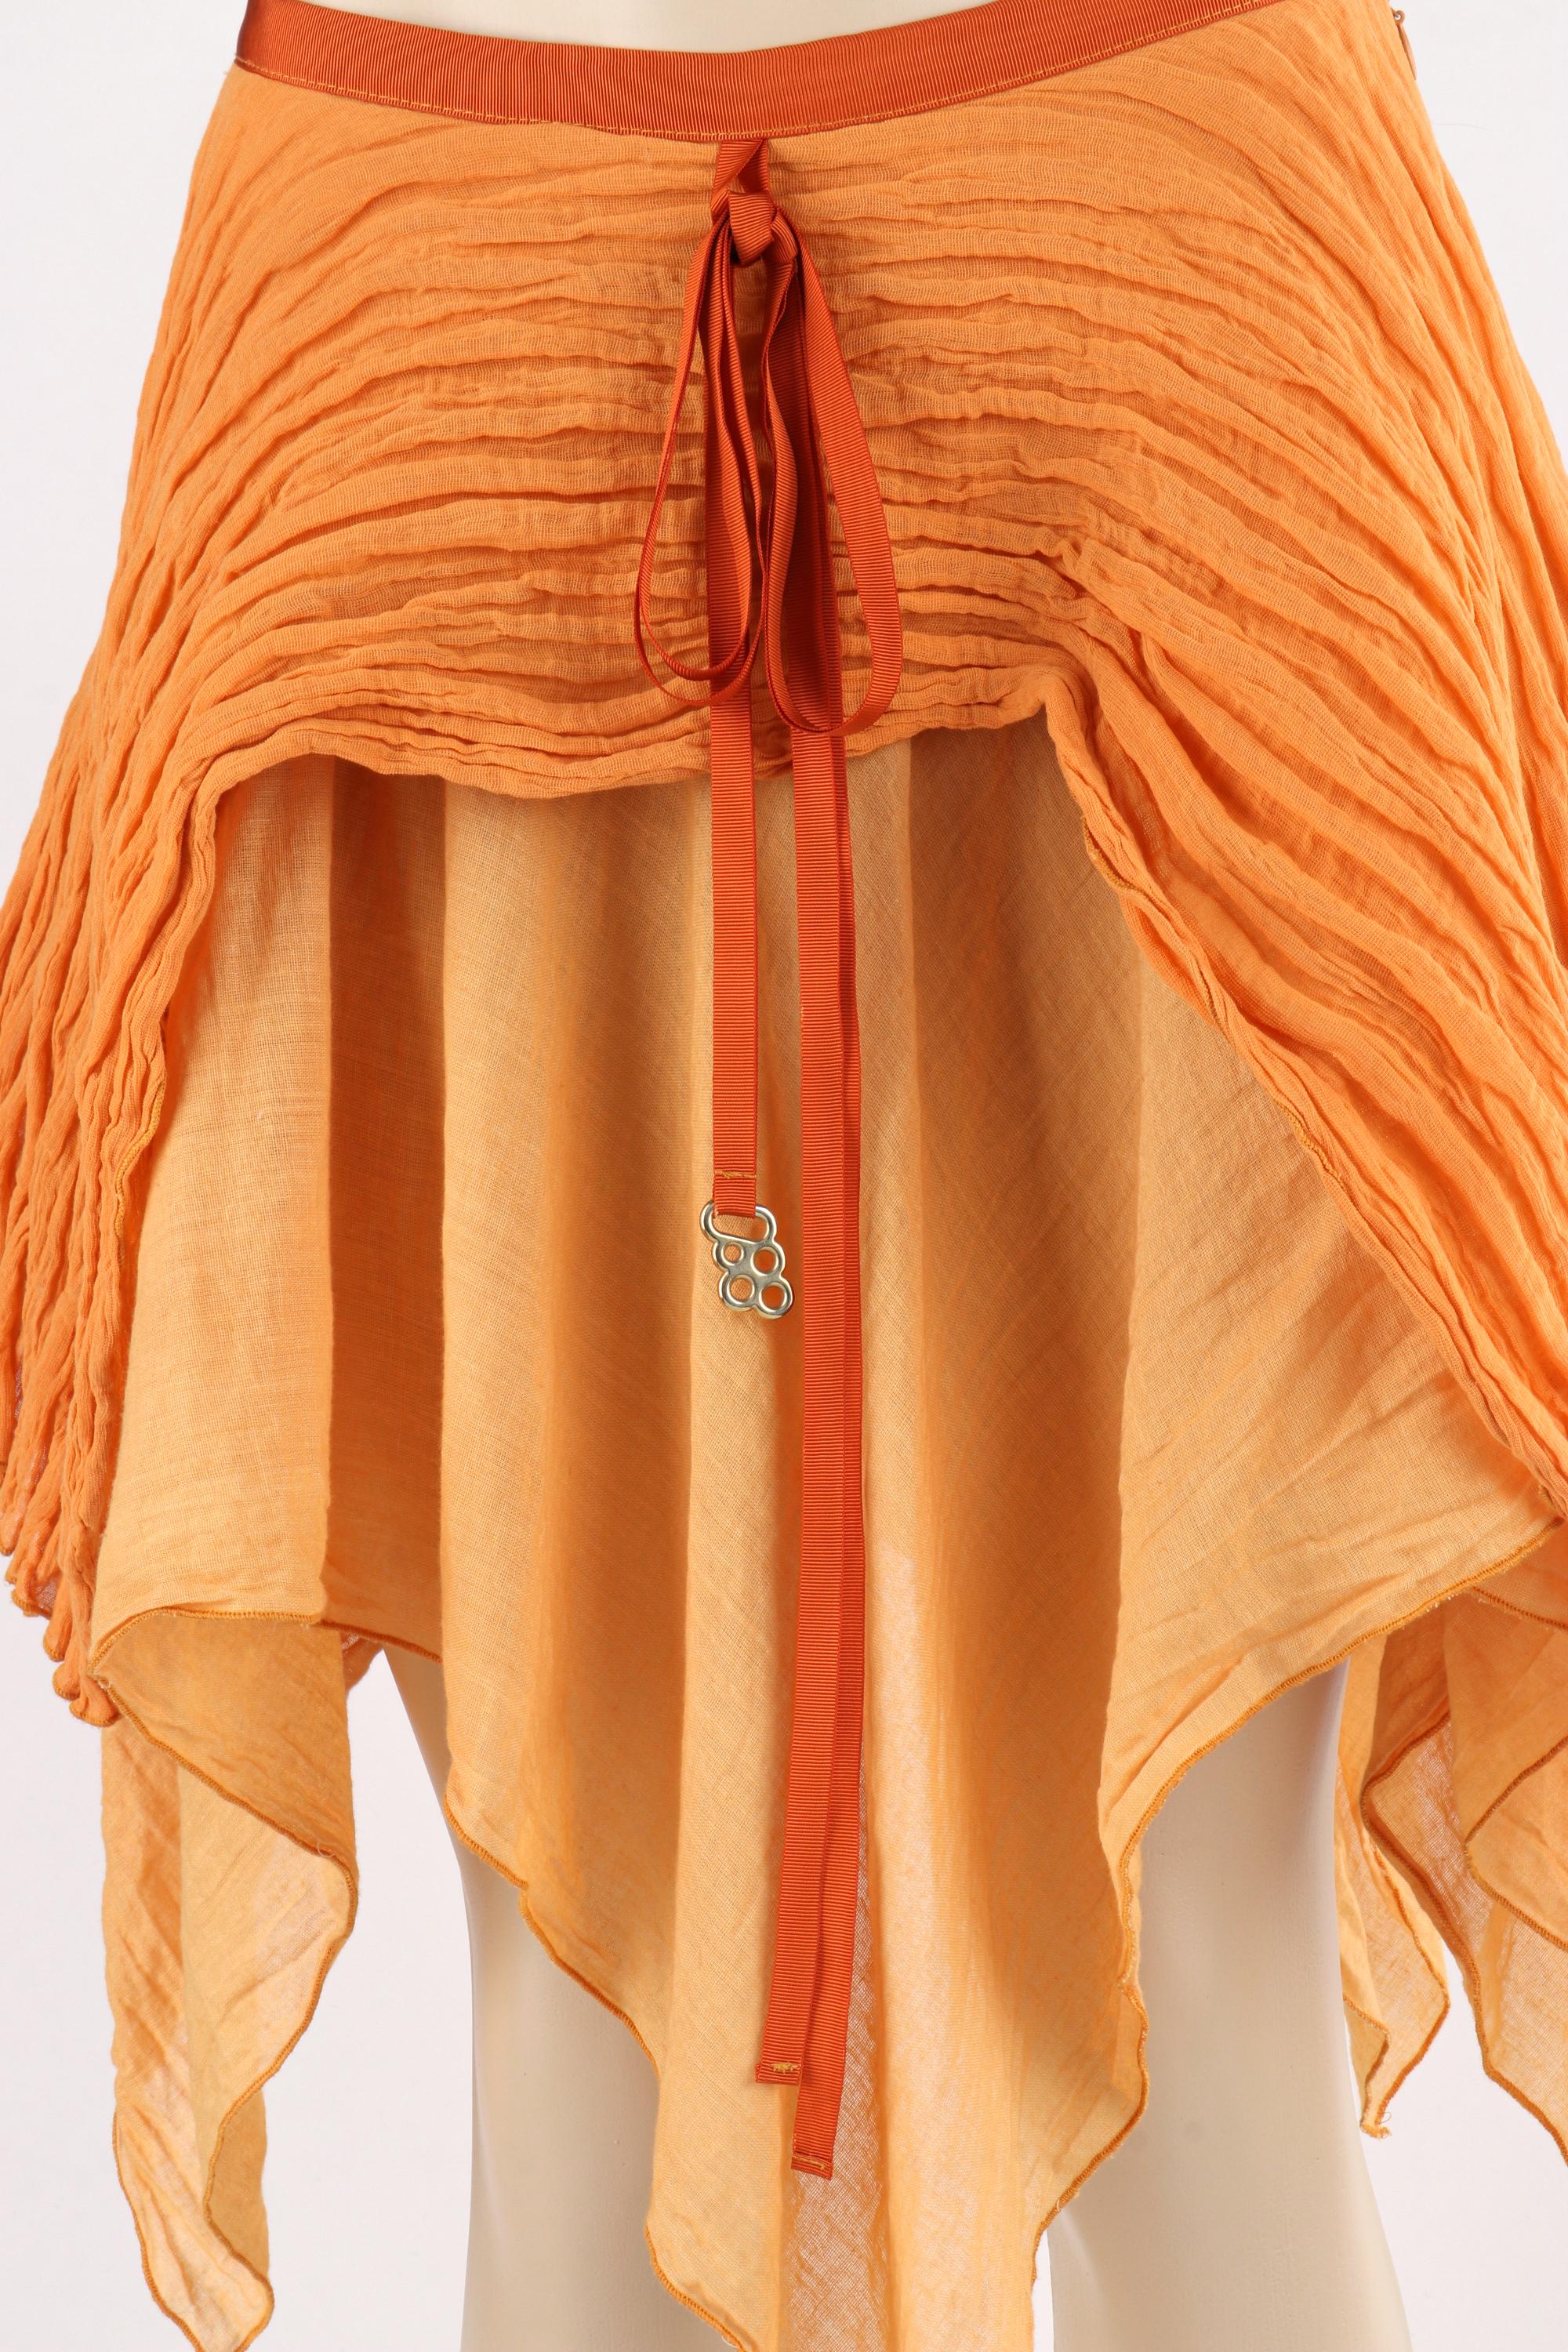 ALEXANDER McQUEEN S/S 1995 Two Toned Orange Layered Asymmetric Ruffled Skirt  In Excellent Condition For Sale In Thiensville, WI